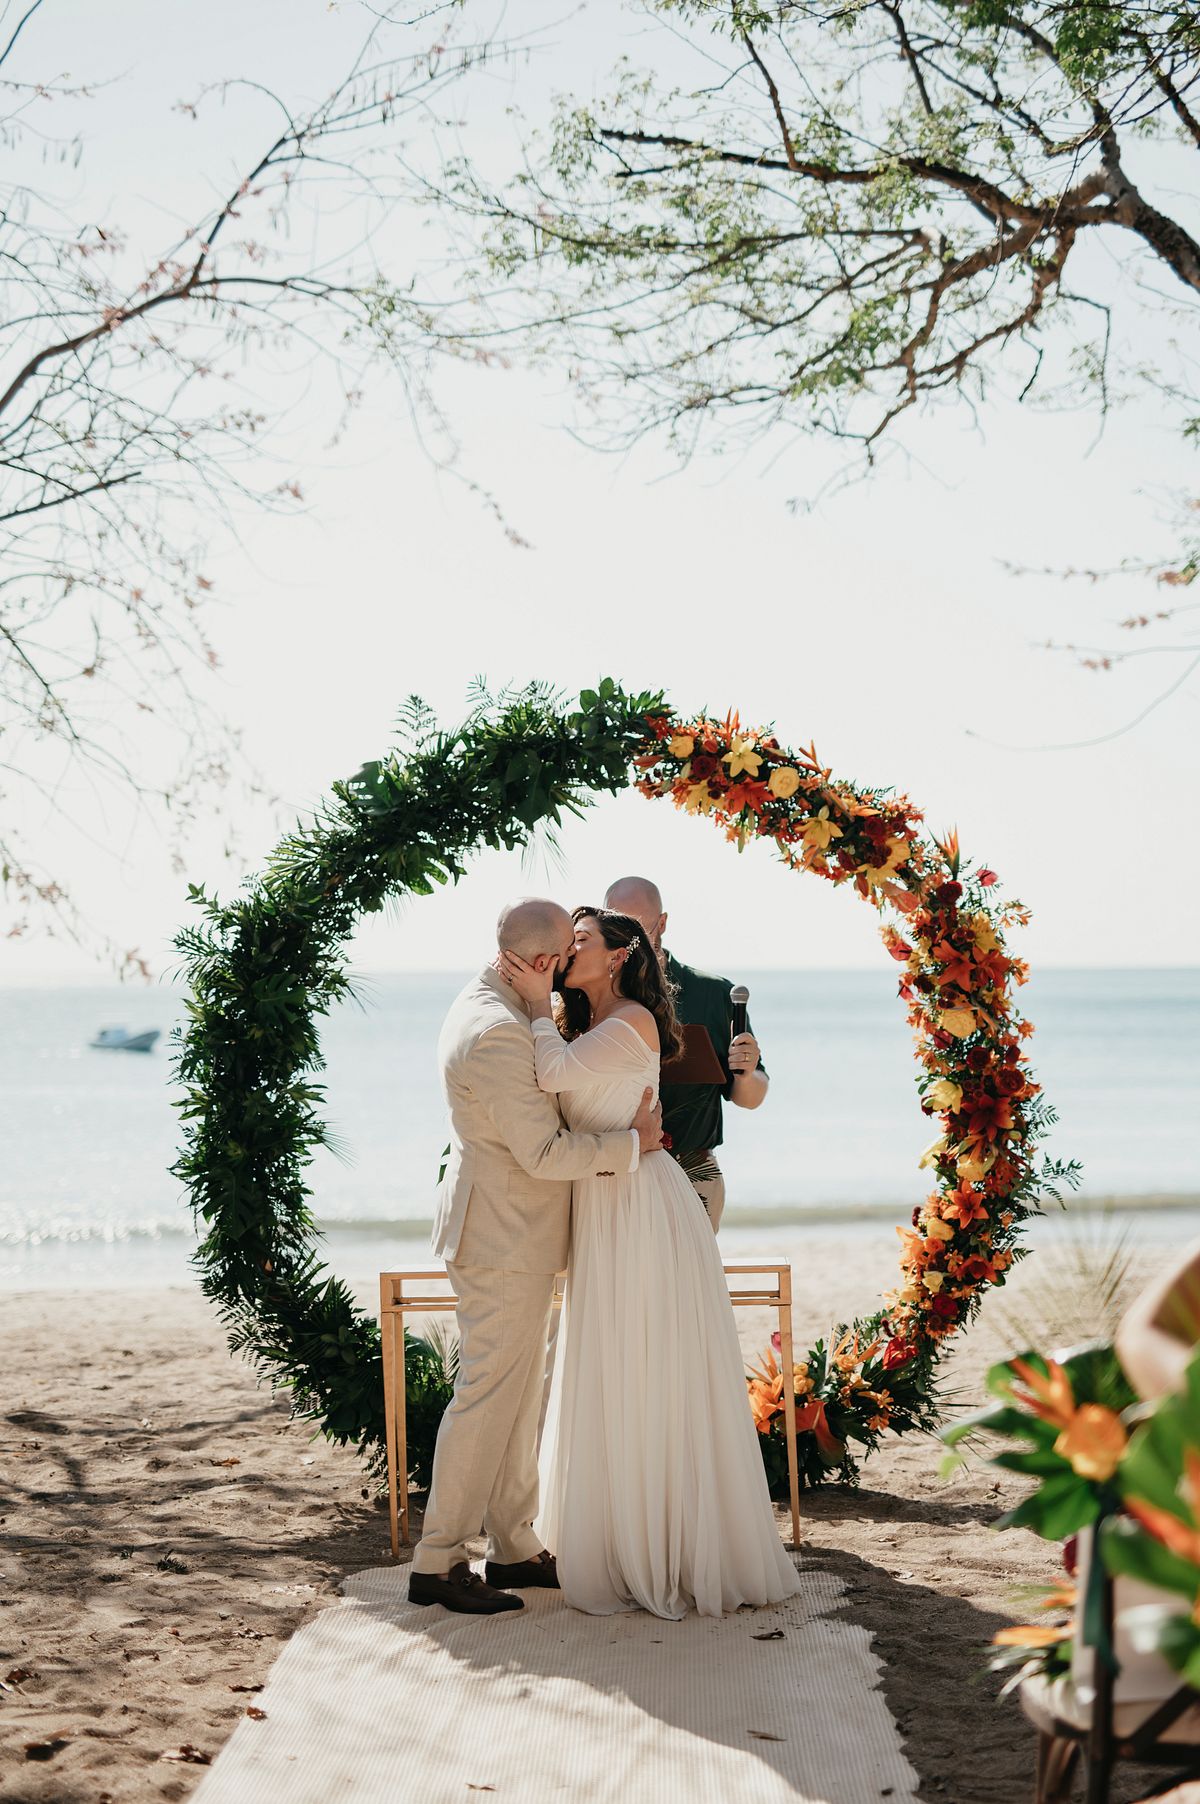 First Kiss as Mr. and Mrs.: A Beautiful Moment on the Beach in Costa Rica